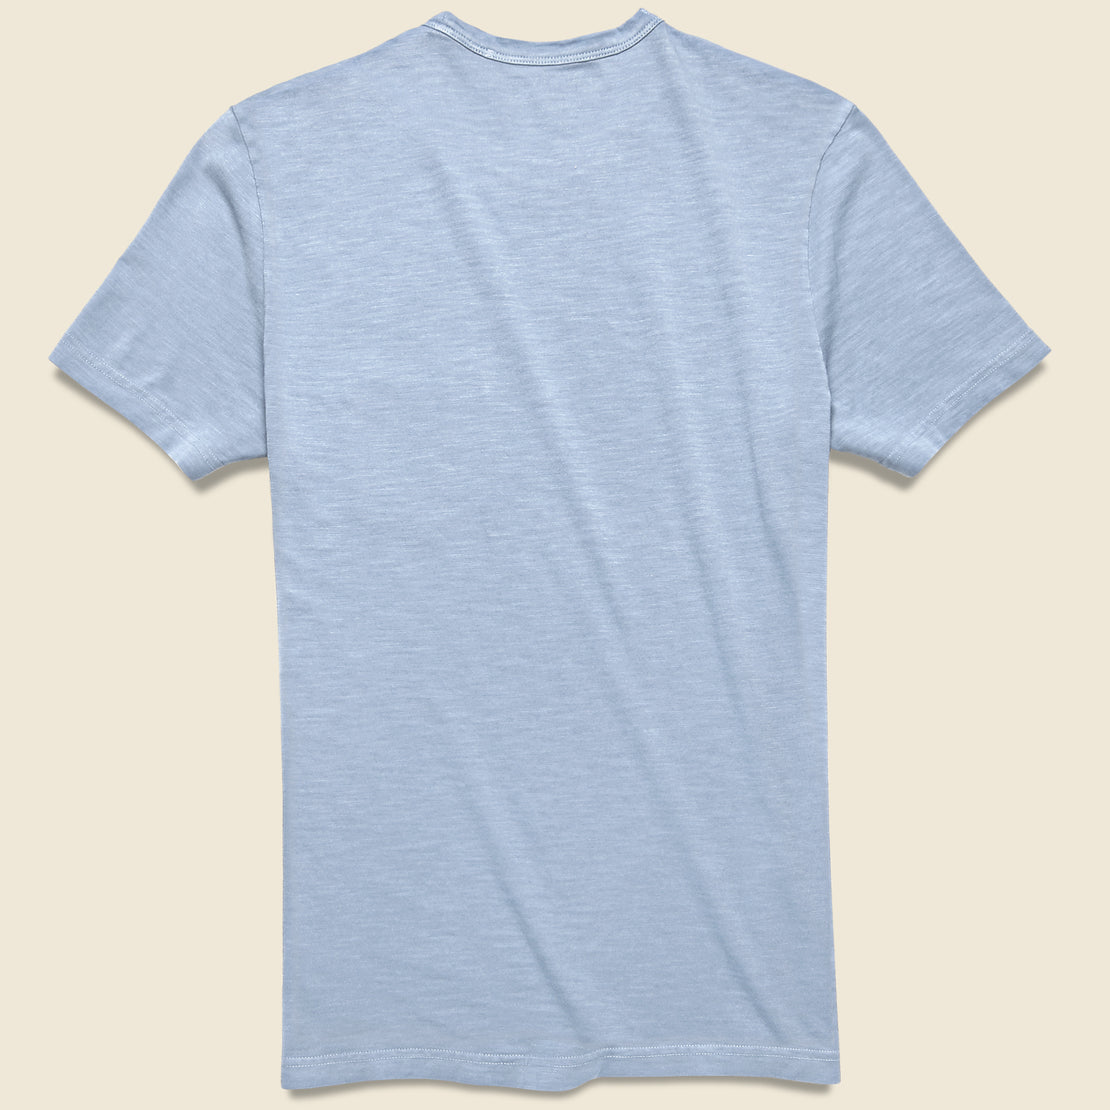 Garment Dyed Pocket Tee - Mariner Blue - Faherty - STAG Provisions - Tops - S/S Tee